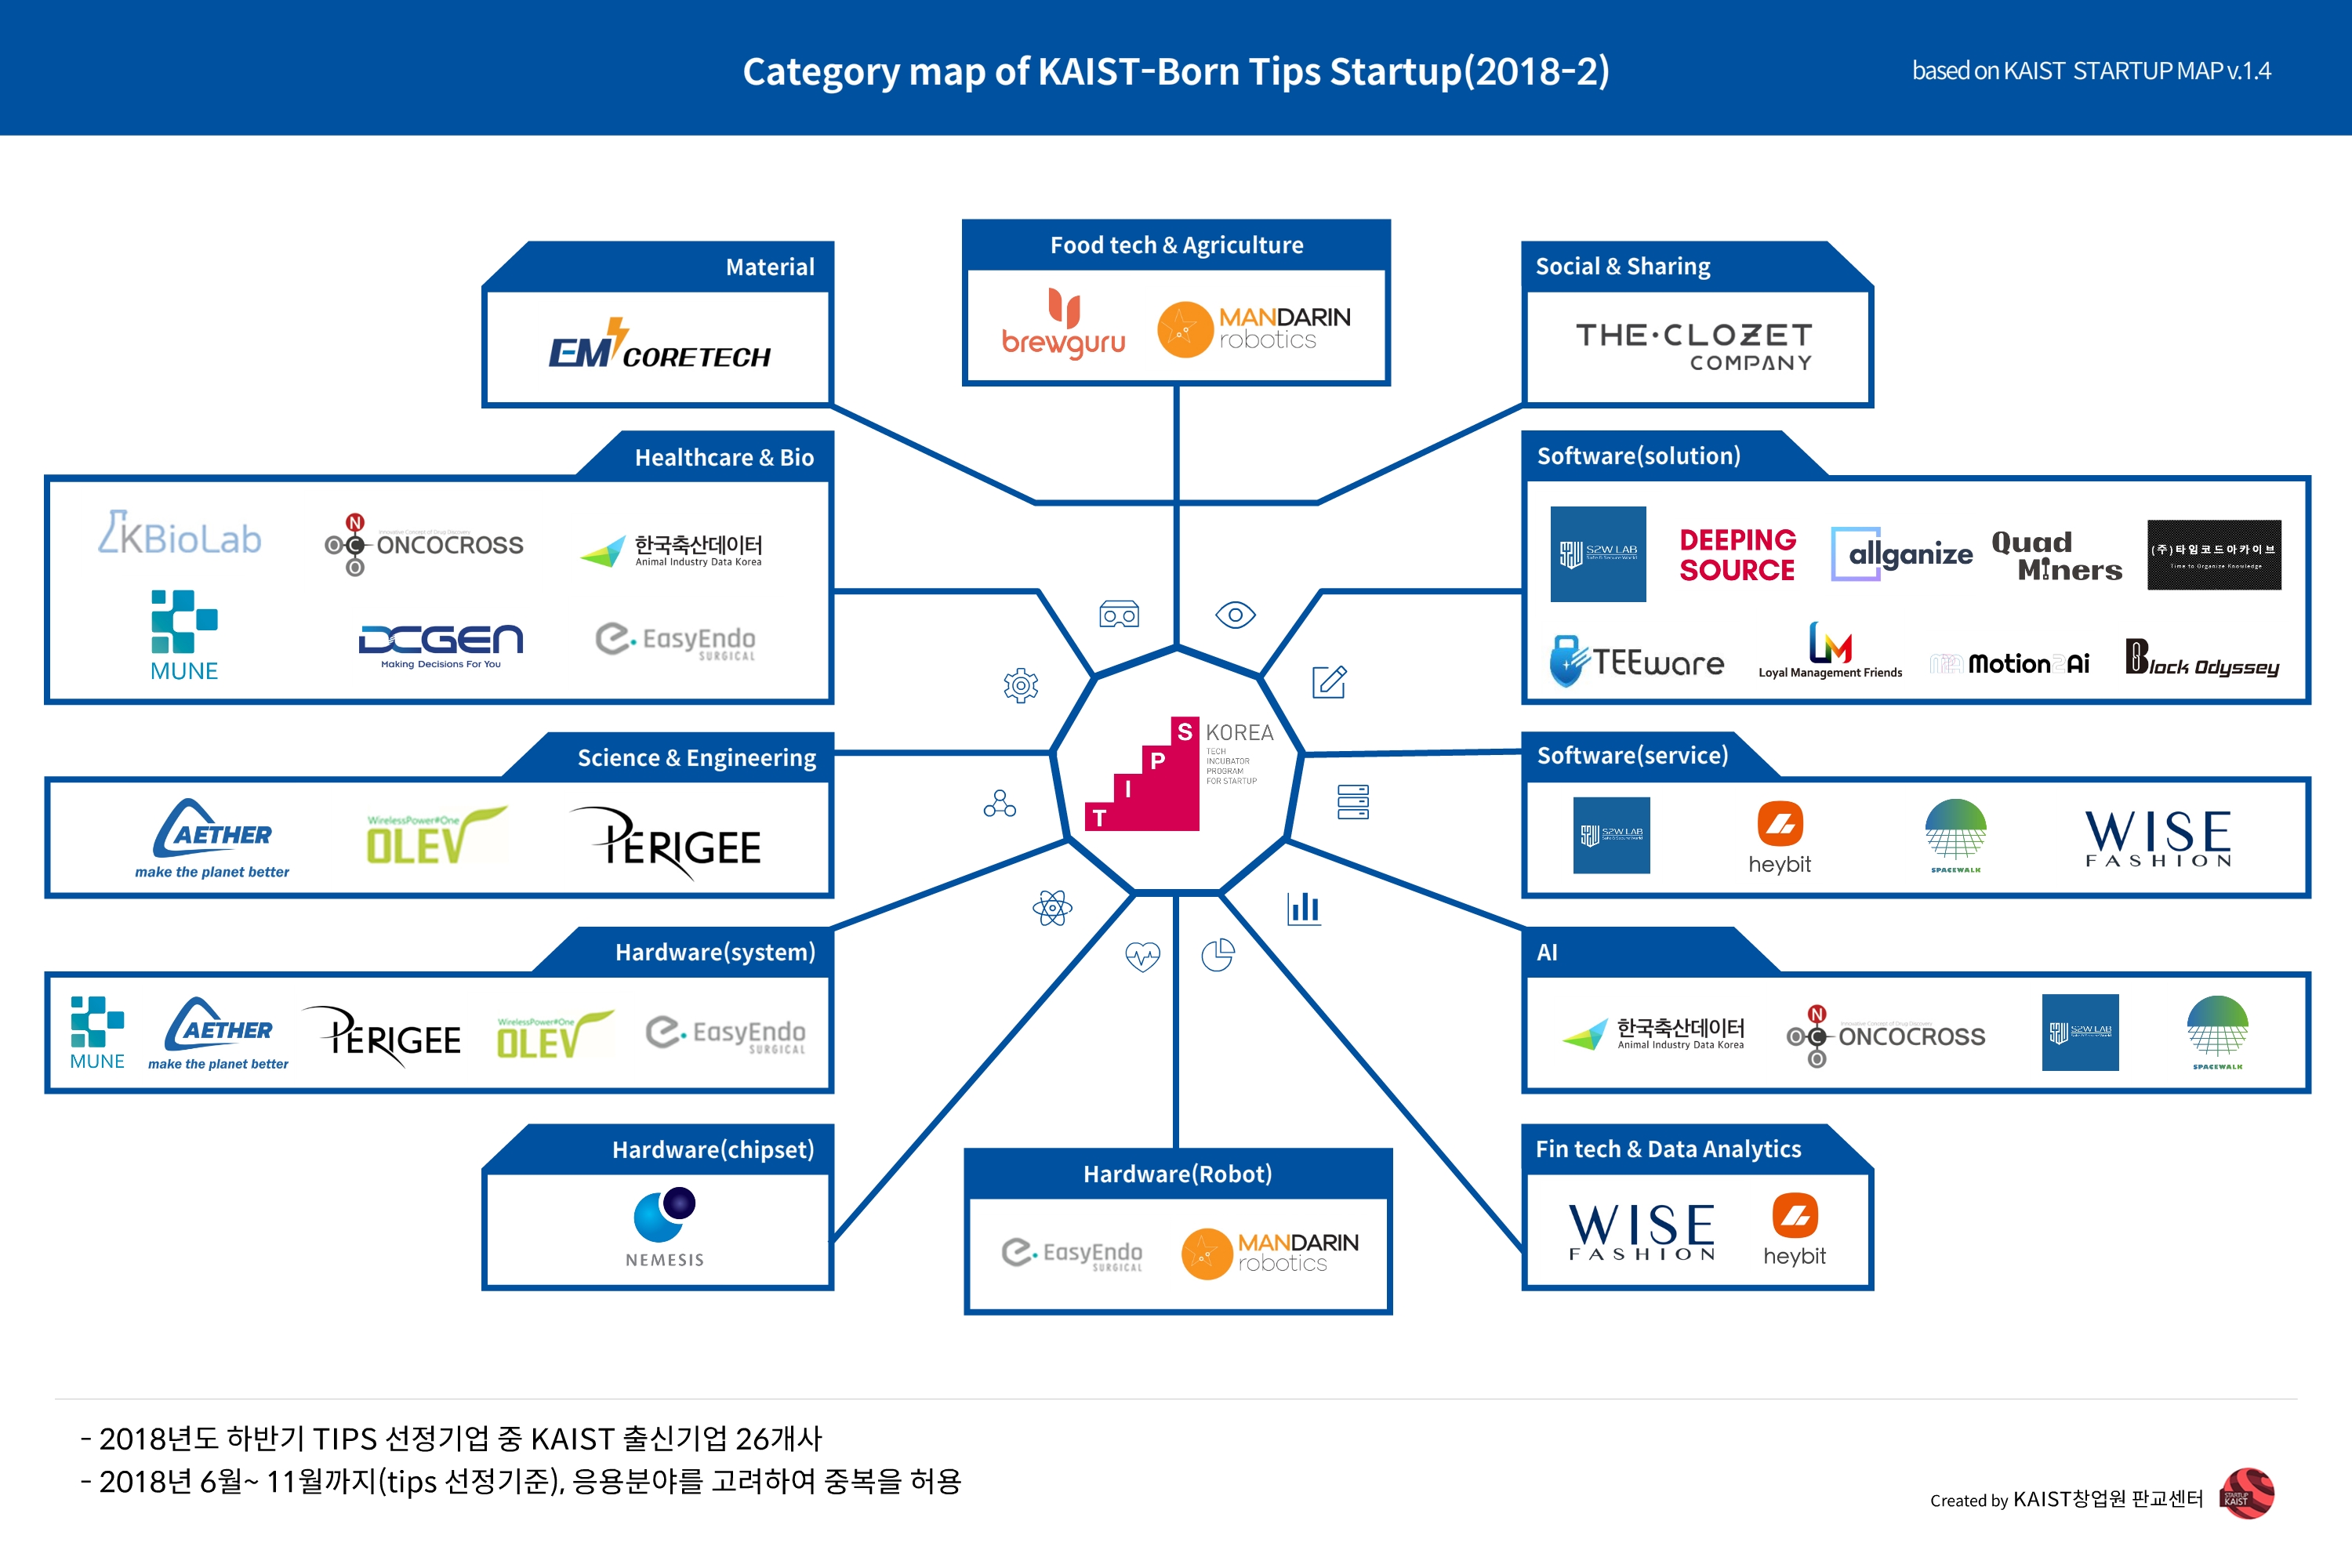 Category Map of KAIST-BORN TIPS STARTUP(based on KAIST-Born TIPS Startup Map v 1.4)